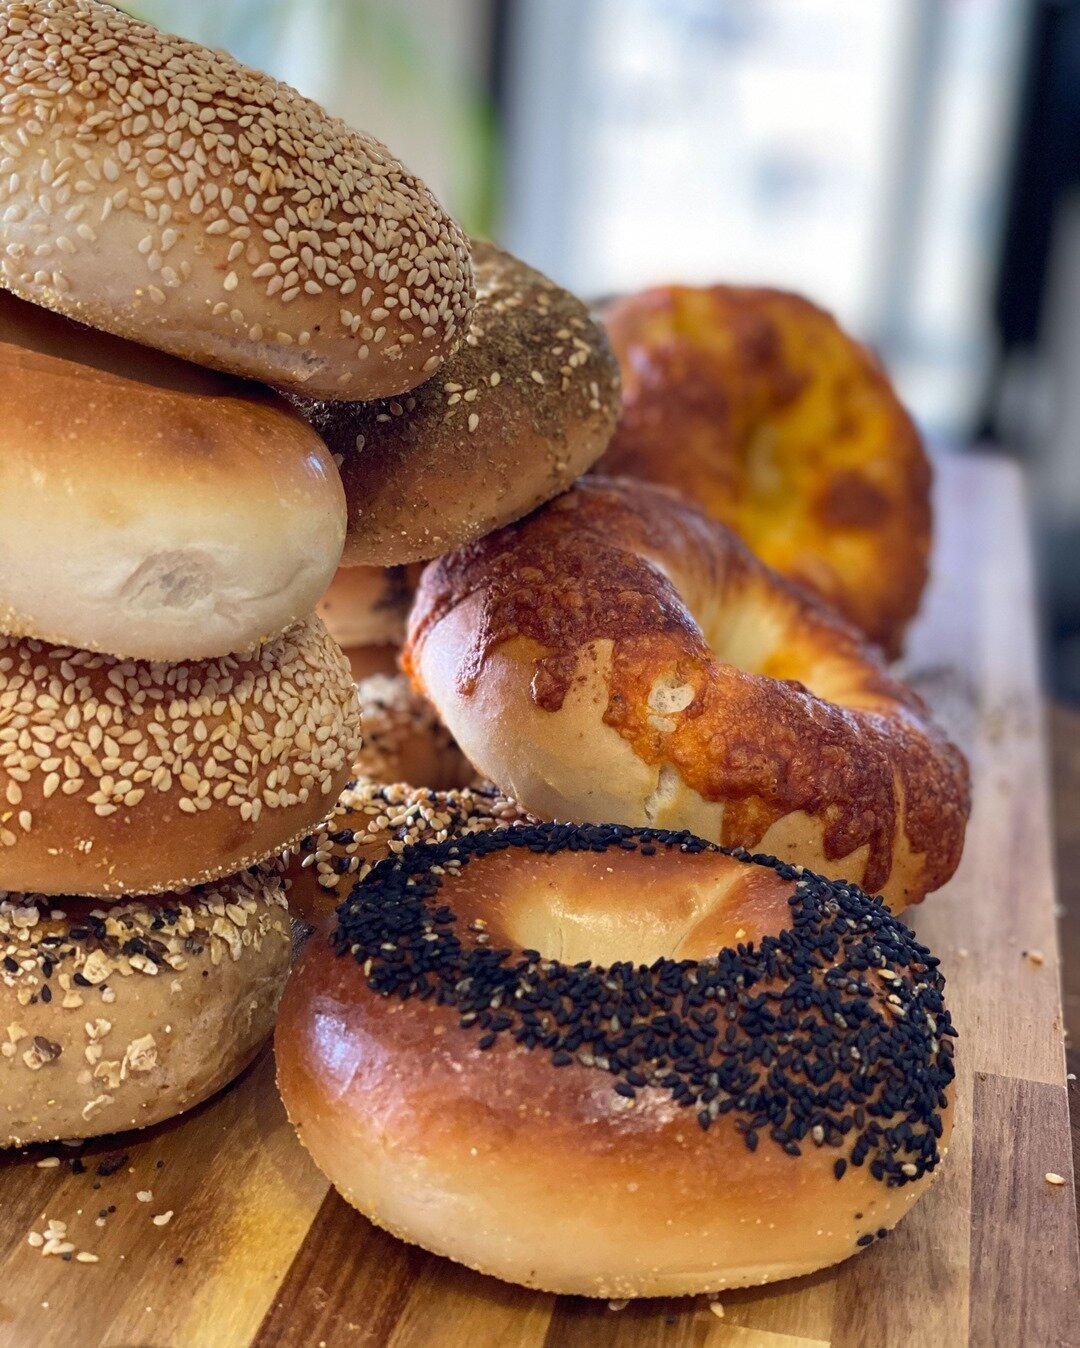 Generously topped with seeds and seasonings to satisfy the strongest of cravings. The @bukabagel is the perfect combination of flavor, texture, and color. ⠀⠀⠀⠀⠀⠀⠀⠀⠀
.⠀⠀⠀⠀⠀⠀⠀⠀⠀
.⠀⠀⠀⠀⠀⠀⠀⠀⠀
.⠀⠀⠀⠀⠀⠀⠀⠀⠀
#bagel⠀⠀⠀⠀⠀⠀⠀⠀⠀
#bagels⠀⠀⠀⠀⠀⠀⠀⠀⠀
#bagelsandwich⠀⠀⠀⠀⠀